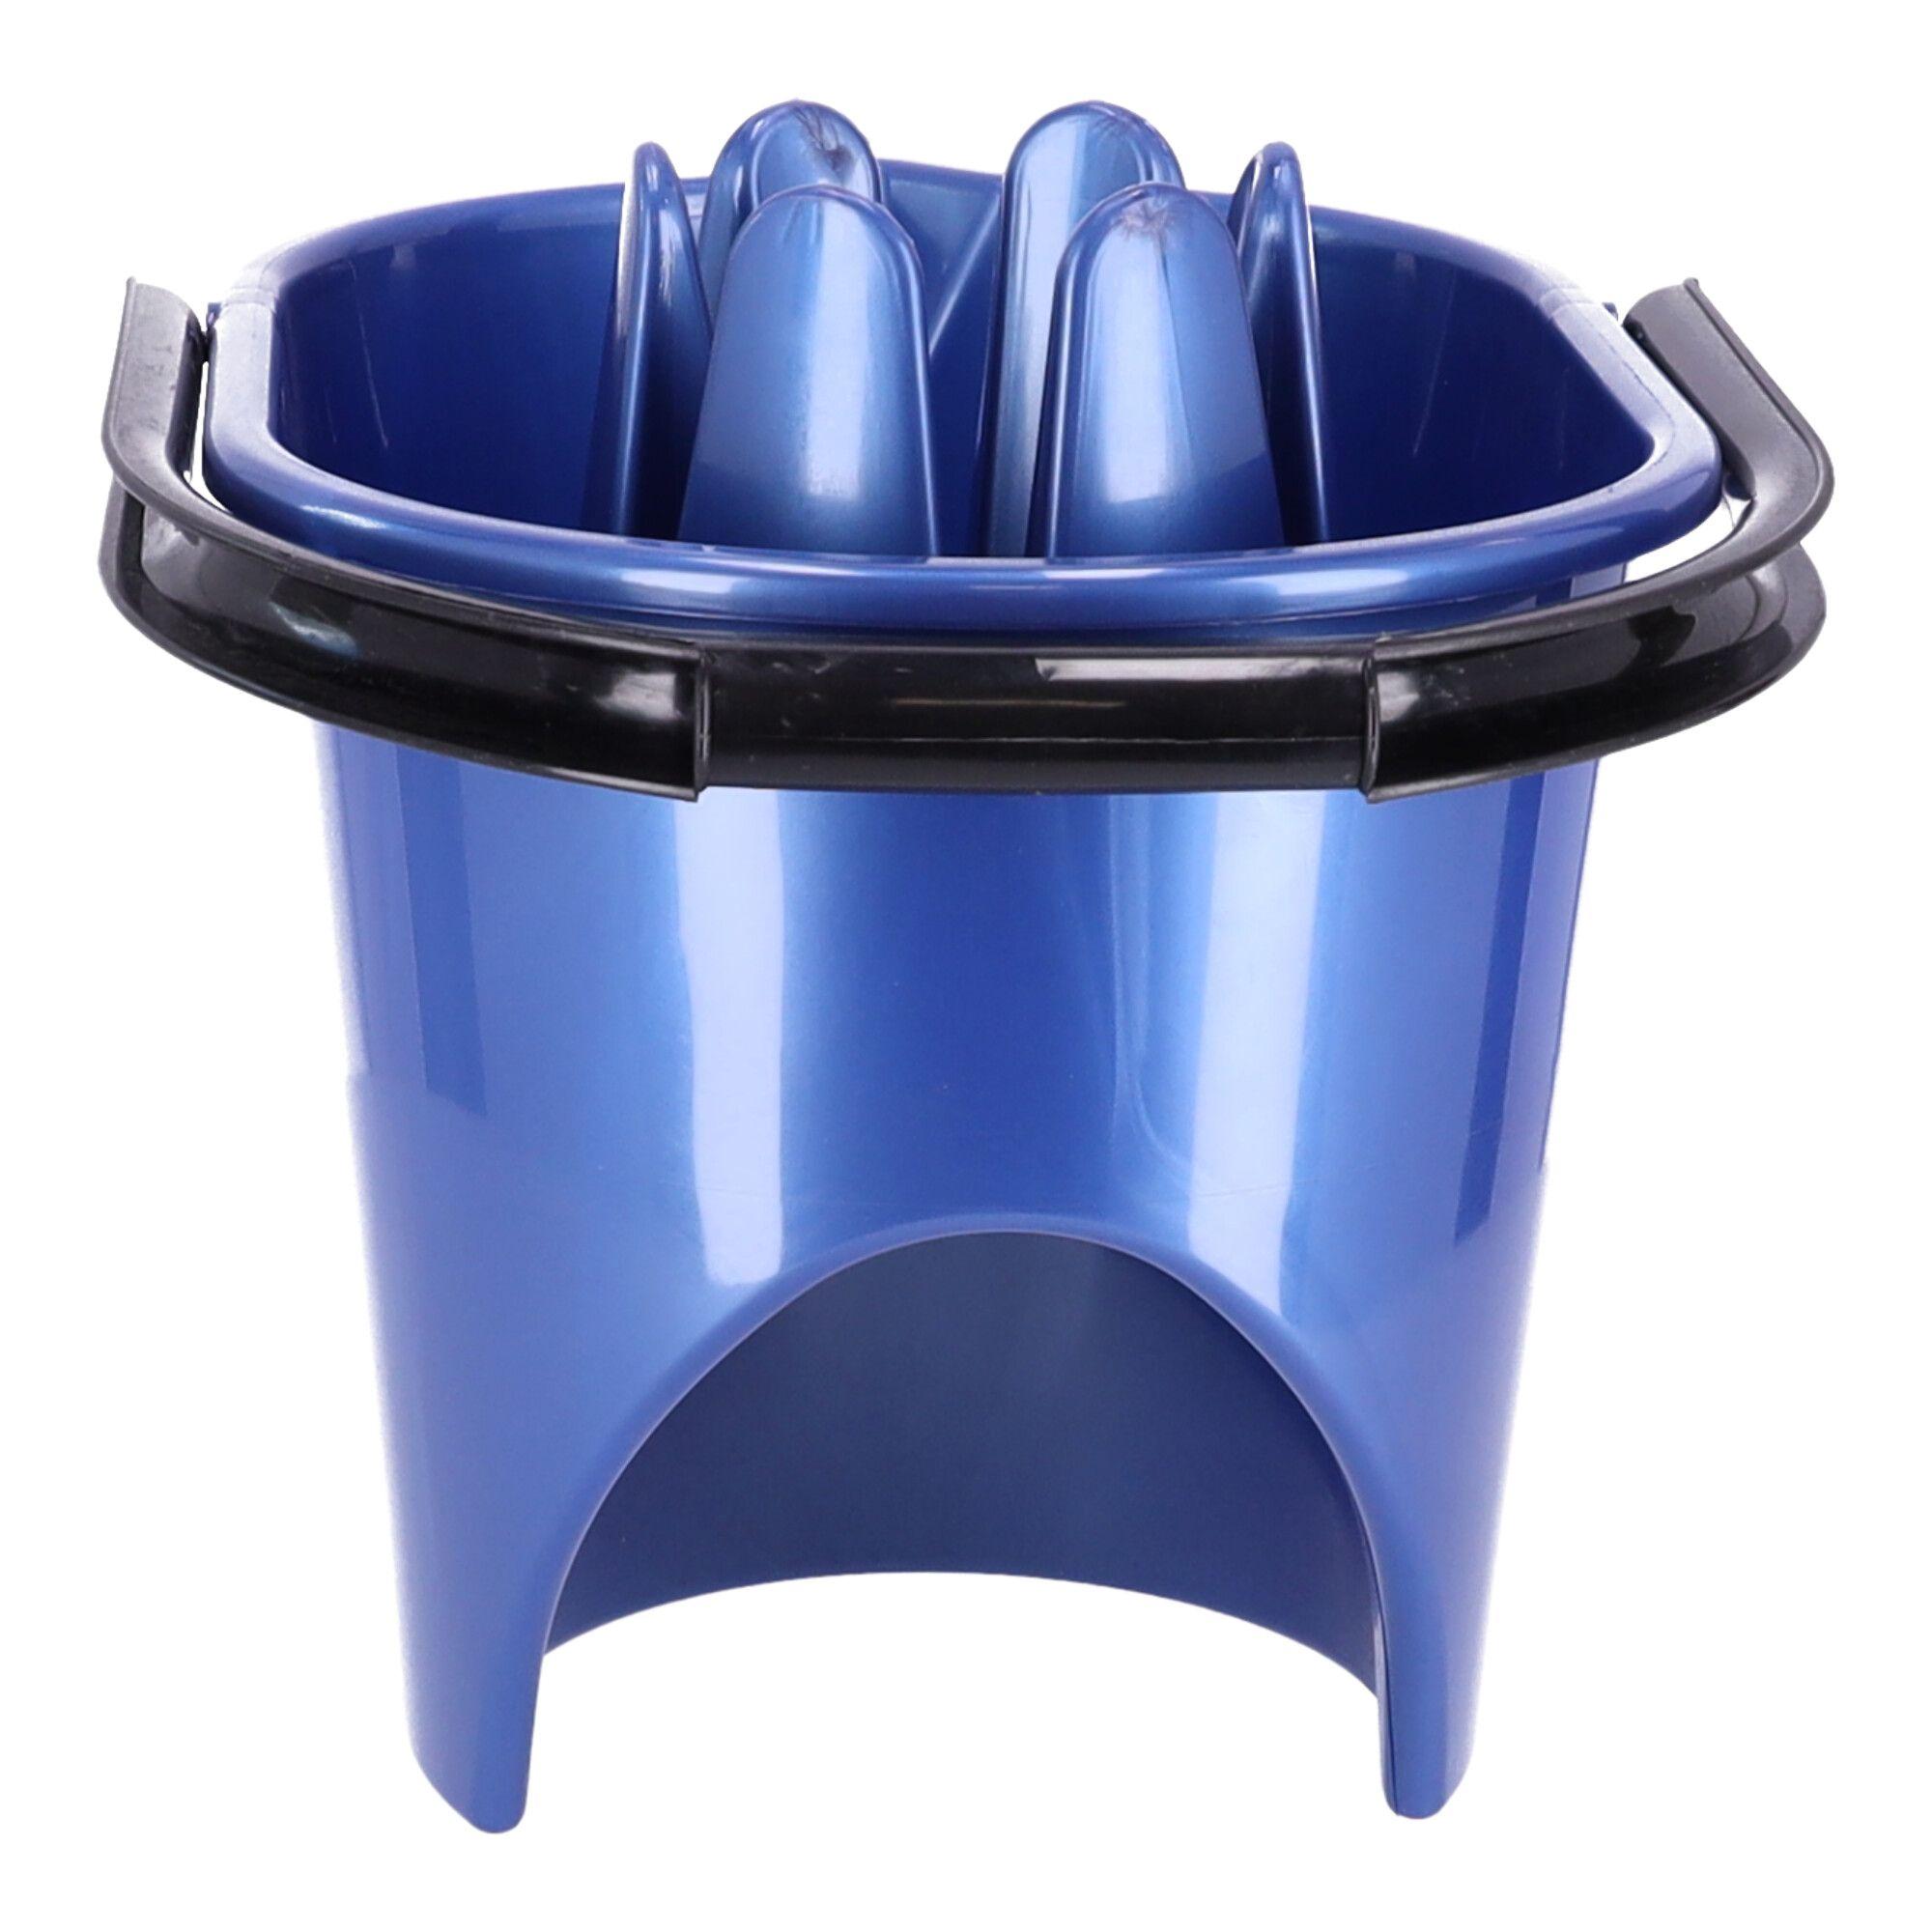 Mop bucket with squeezer, POLISH PRODUCT - navy blue